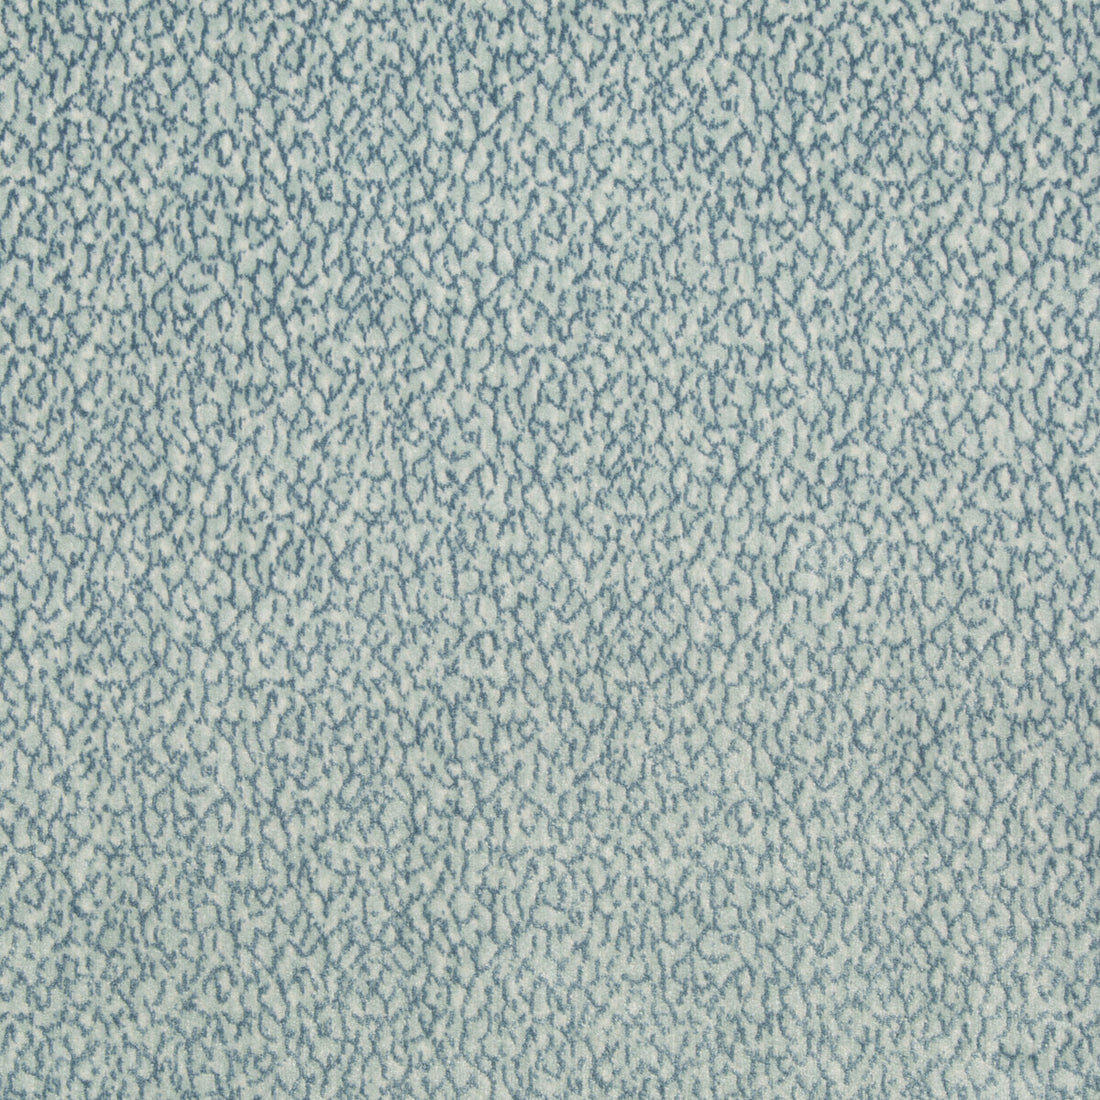 Littlerock fabric in lagoon color - pattern 34980.15.0 - by Kravet Basics in the Jeffrey Alan Marks Oceanview collection